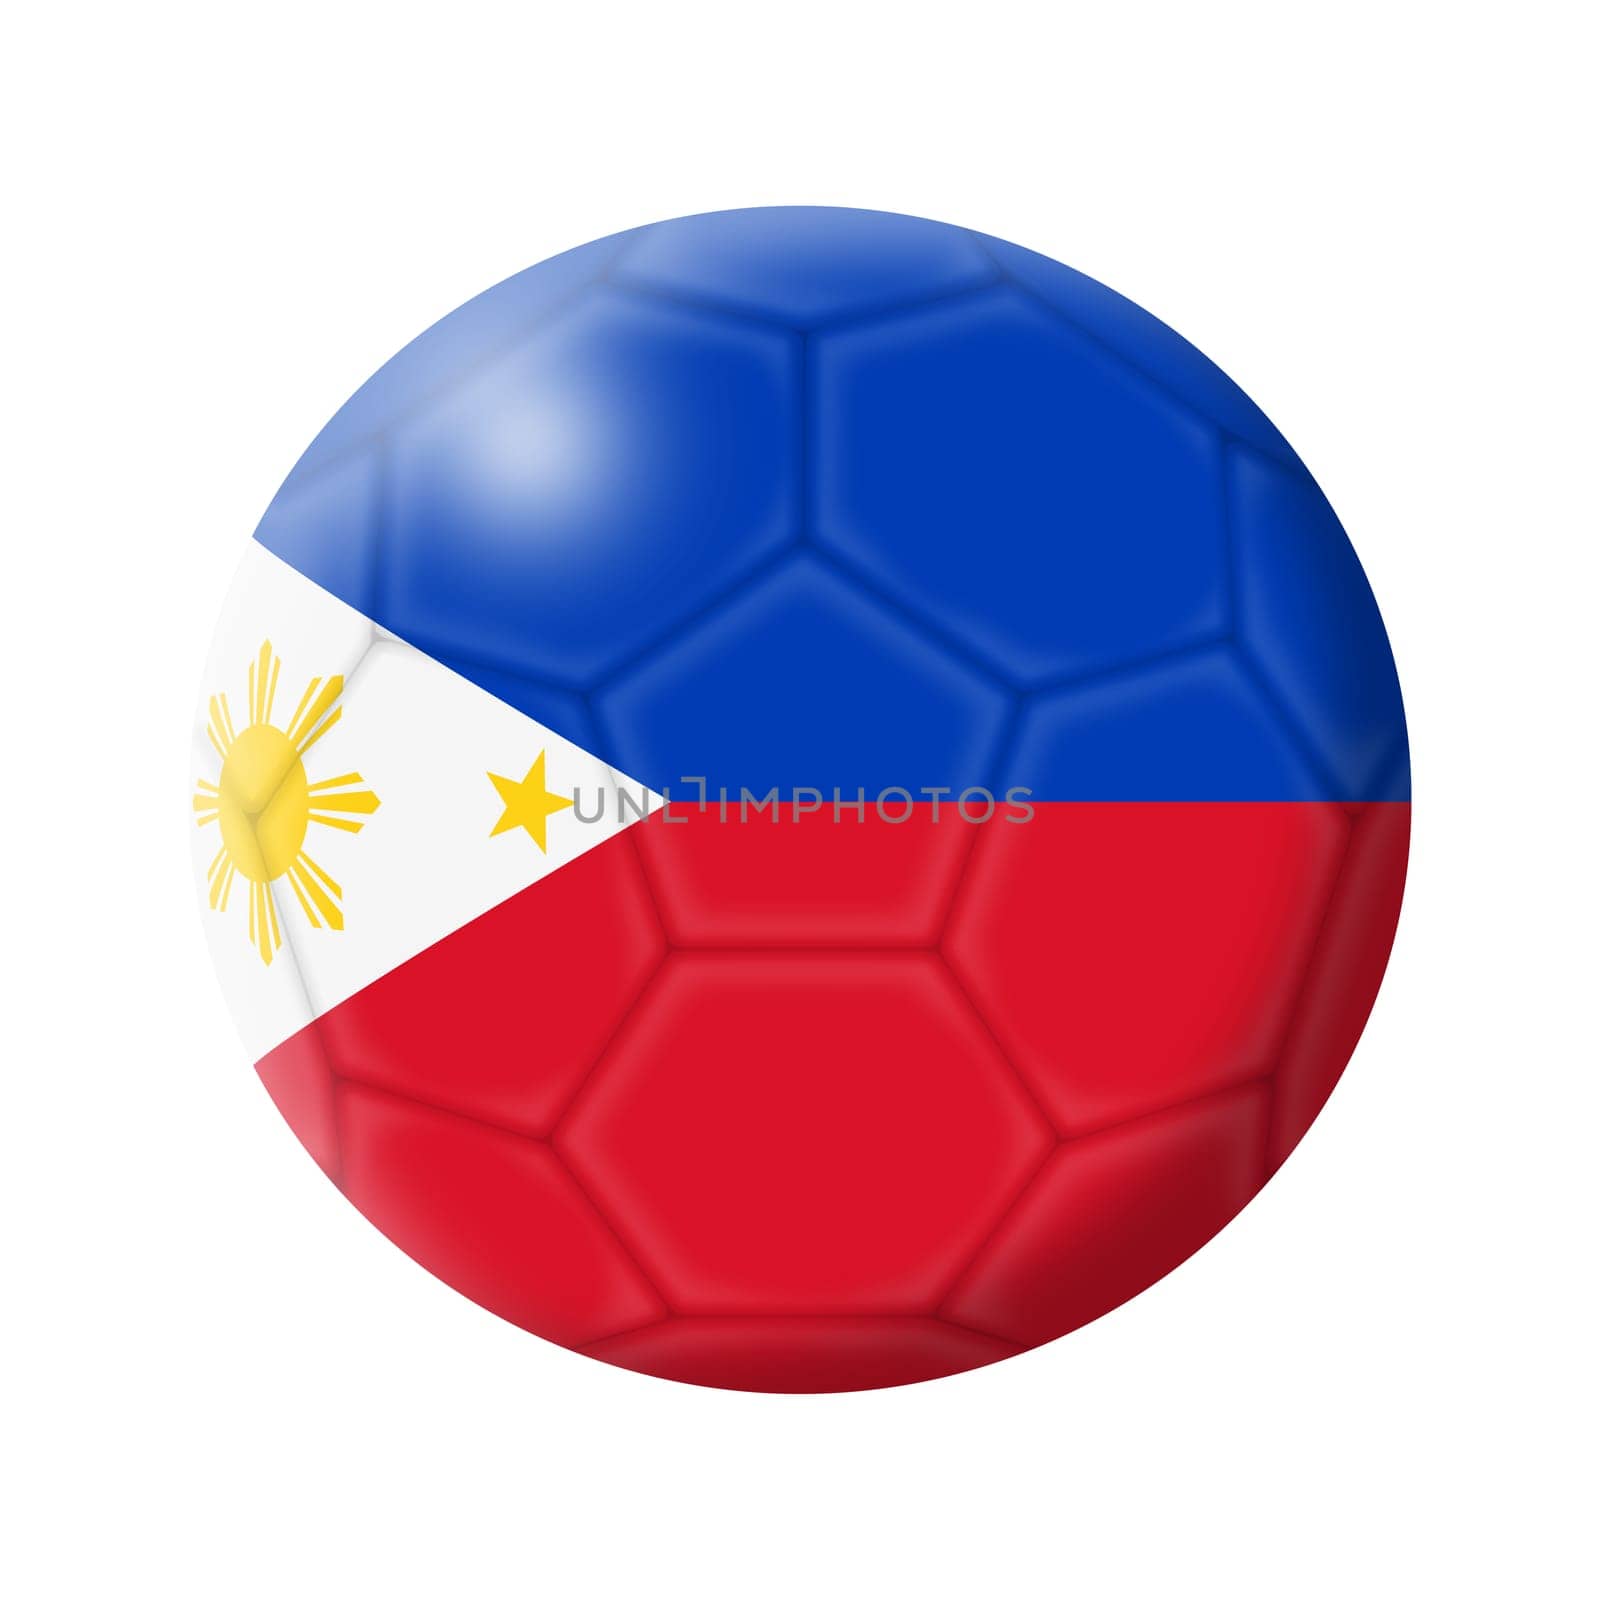 Philippines soccer ball football with clipping path by VivacityImages